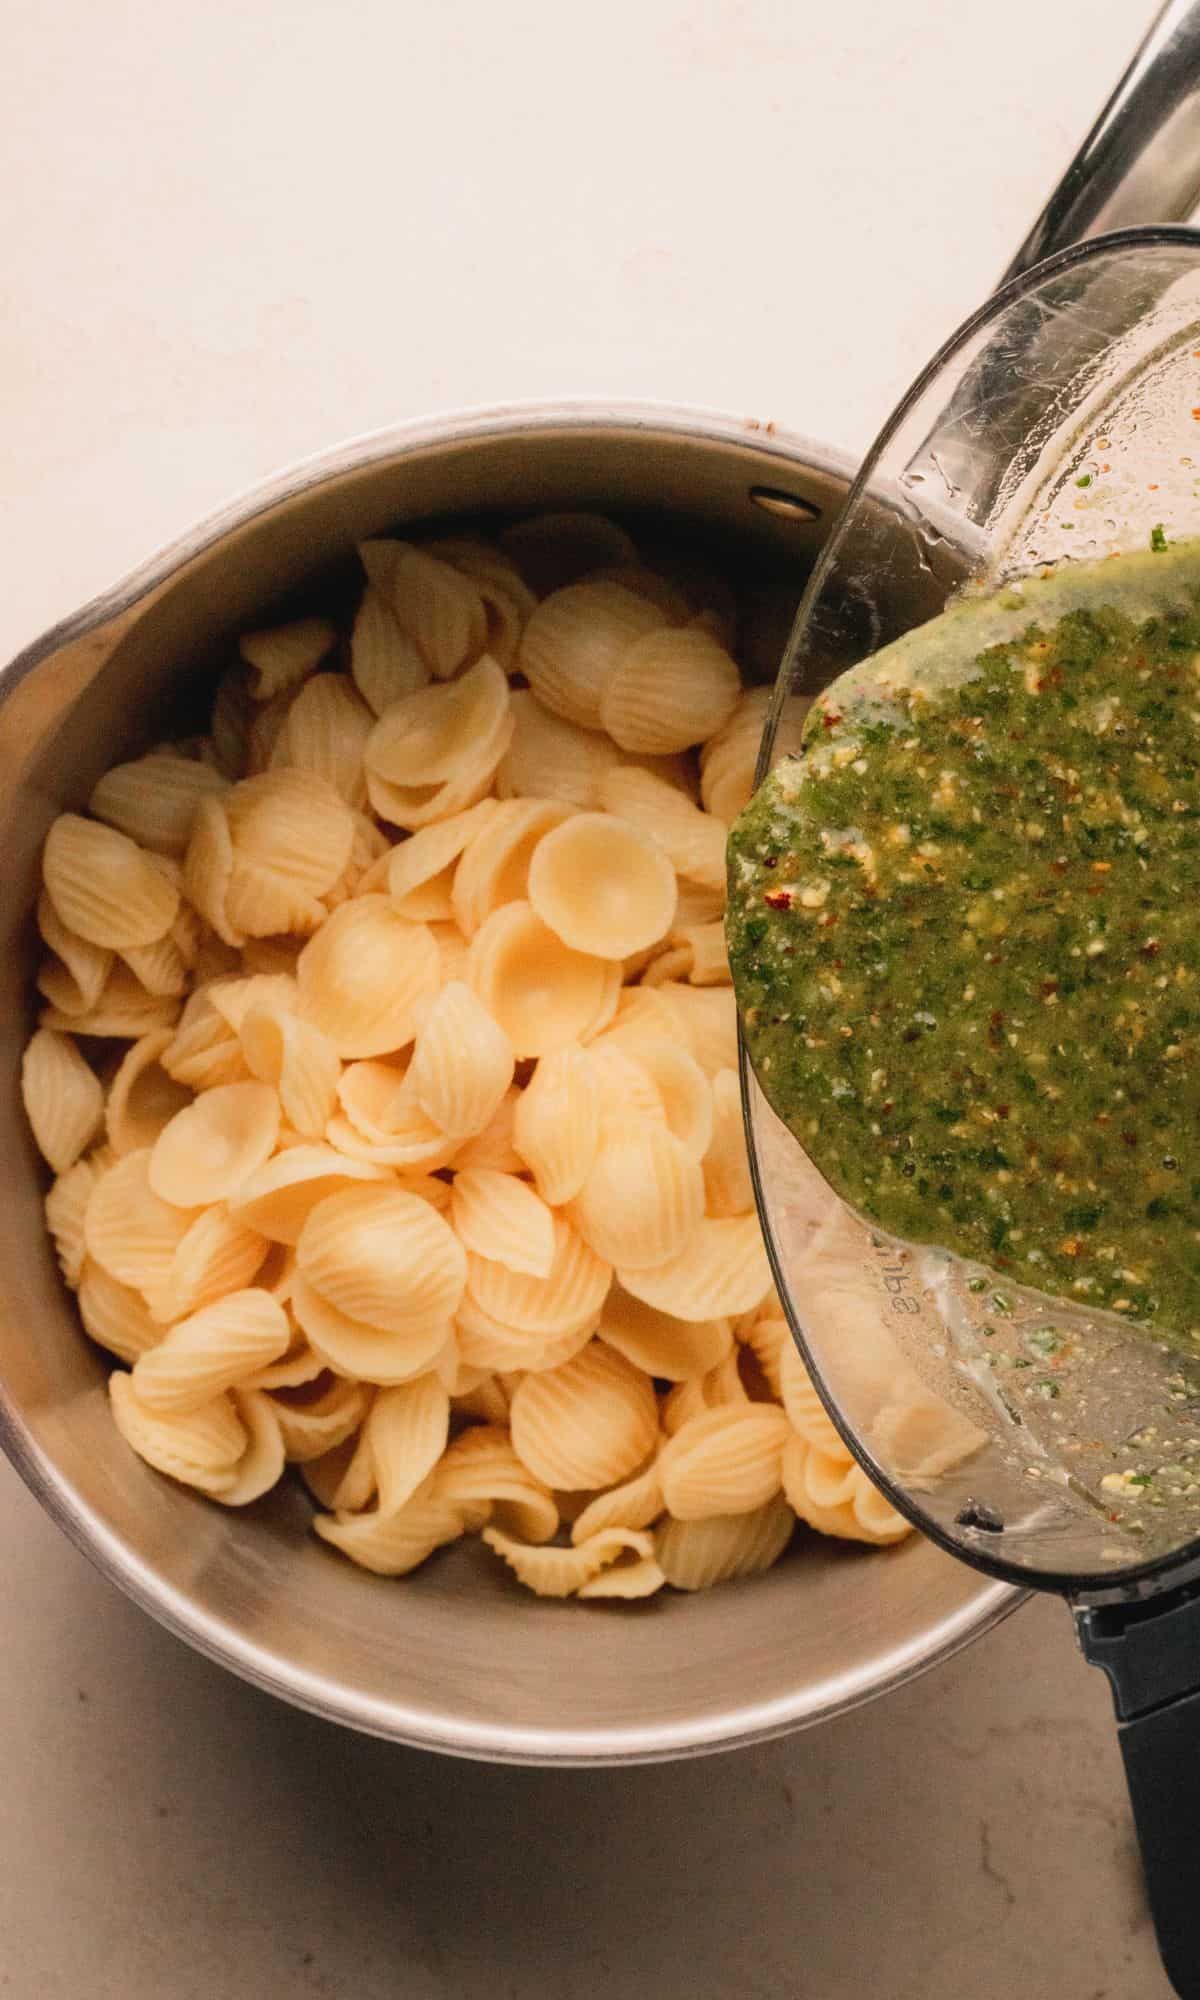 Adding parsley pesto to cooked pasta in a saucepan.